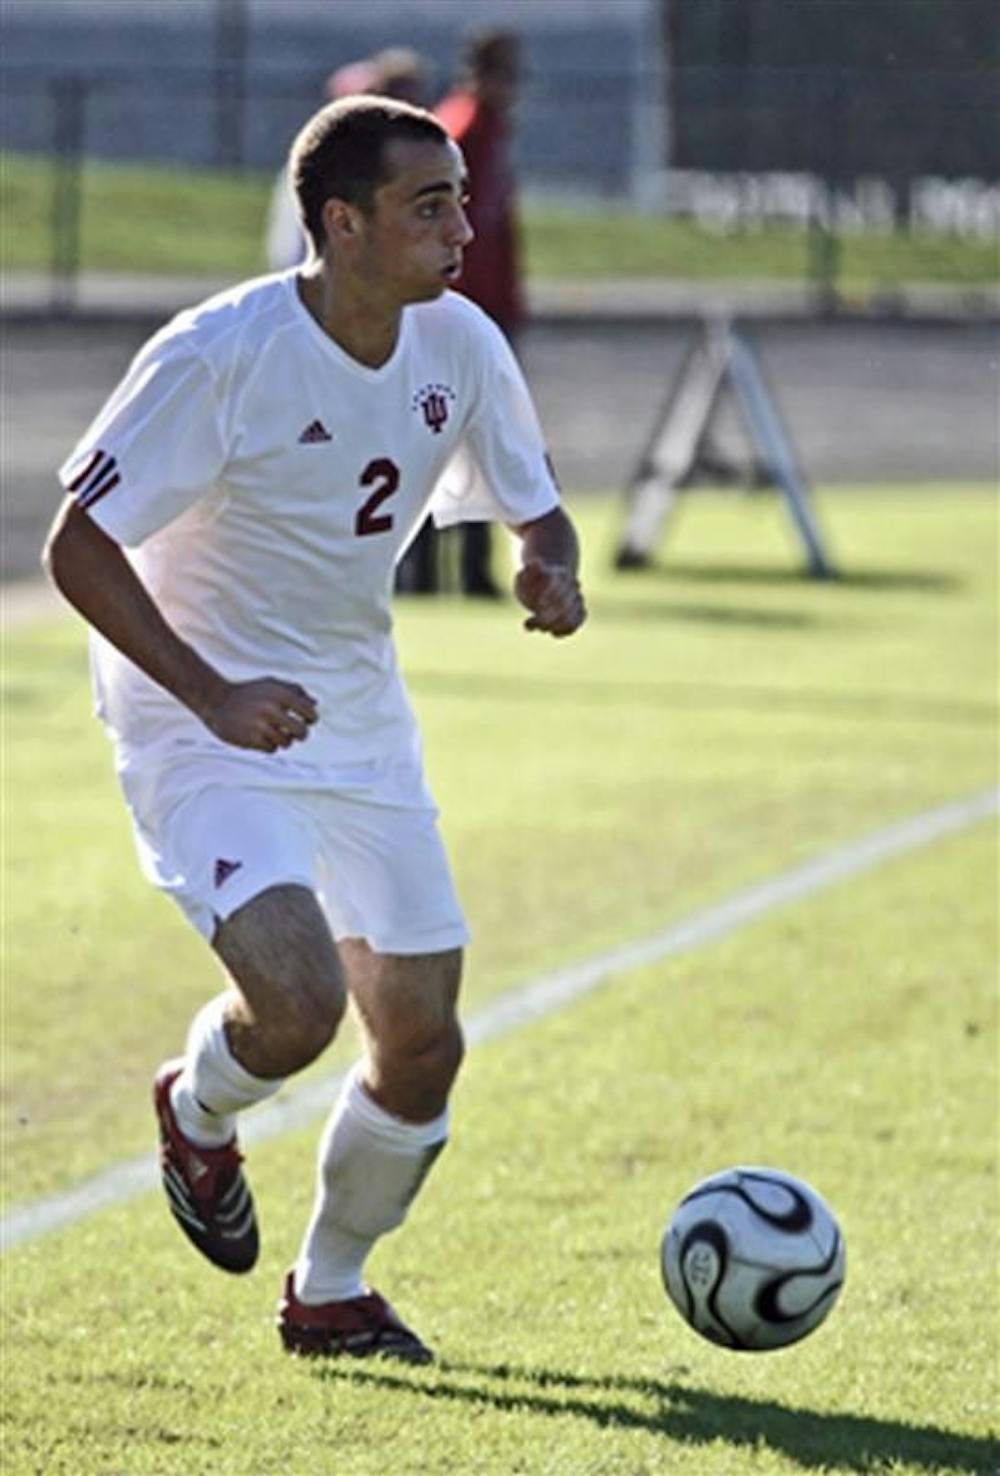 IU sophomore midfielder Rich Balchan surveys the field during the Hoosiers game against Penn State Sunday, Oct. 28, 2007 at Bill Armstrong Stadium. IU won 1-0.